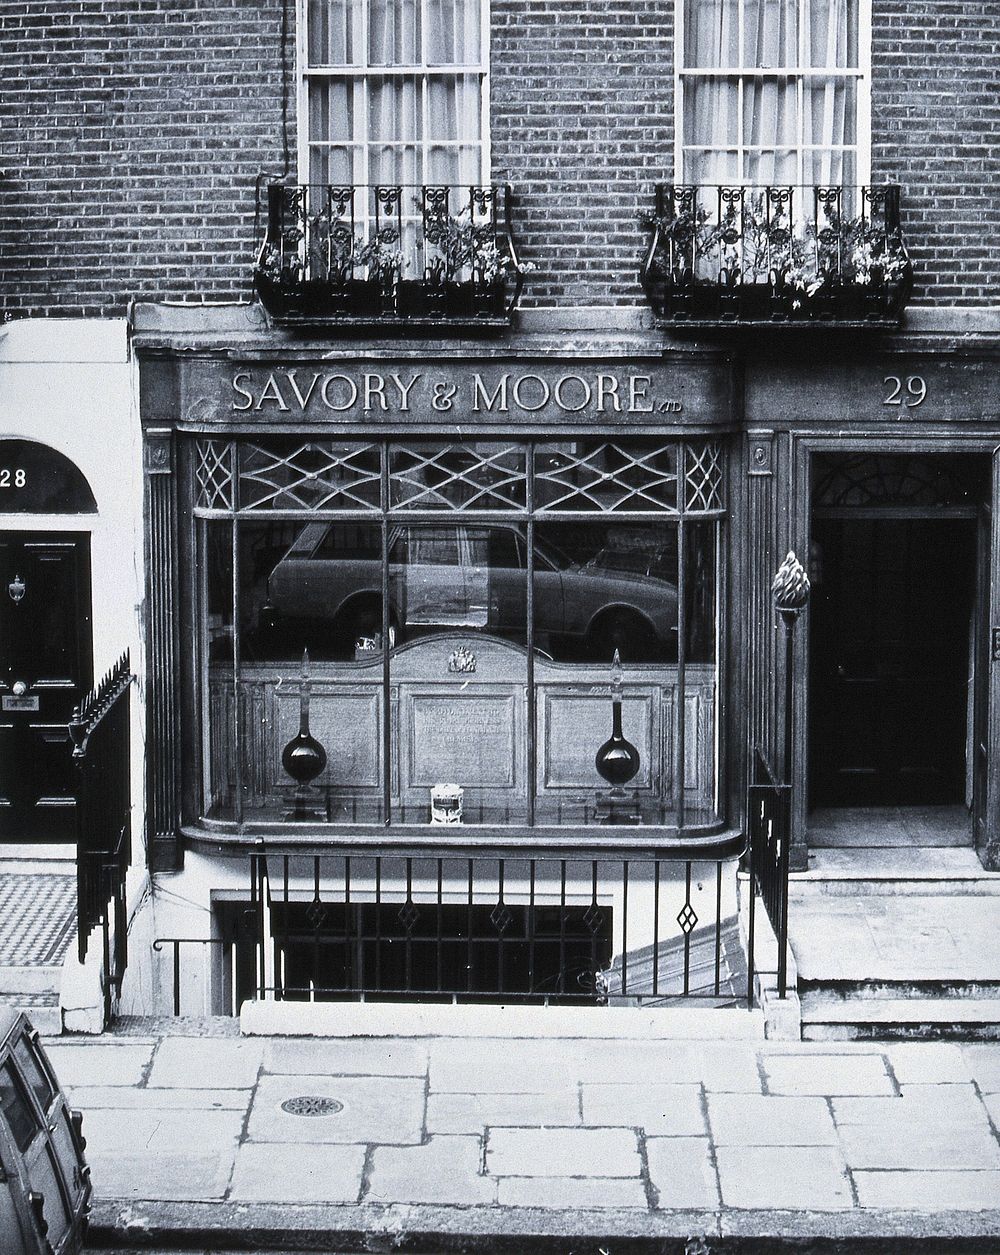 Savory & Moore Ltd, London: the window and front door of the pharmacy. Photograph.